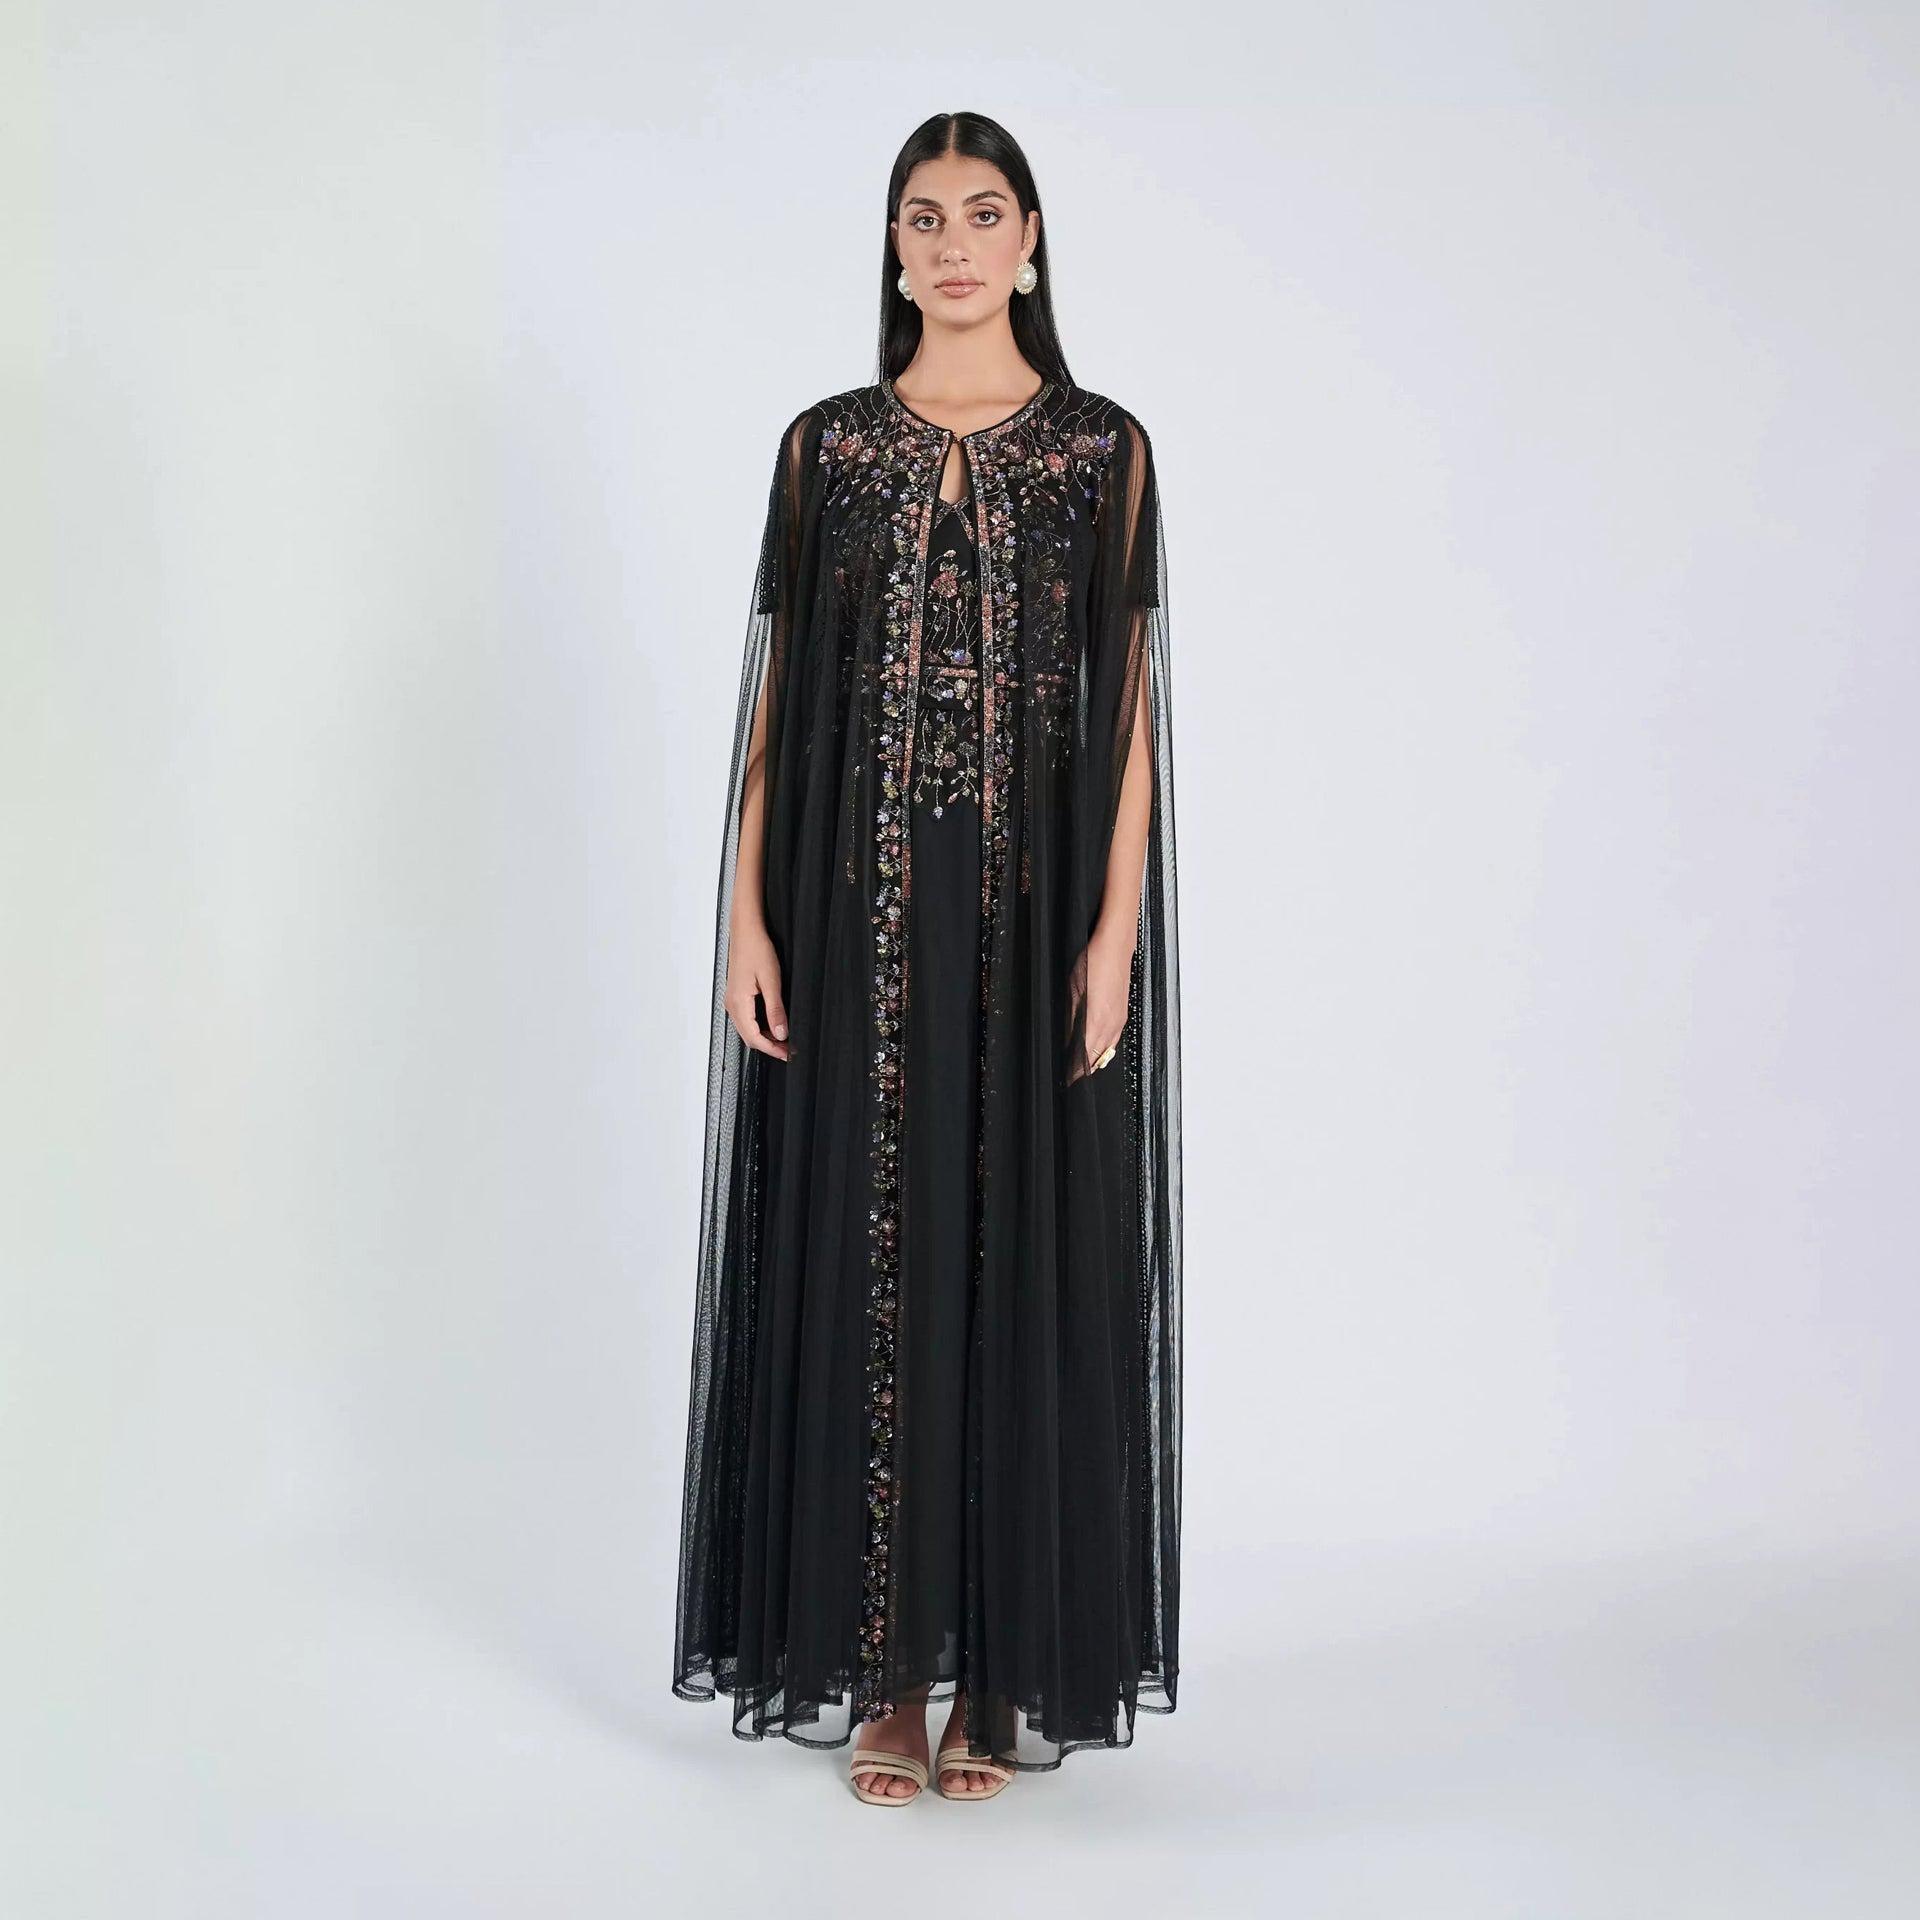 Black Nouran Dress From Shalky - WECRE8